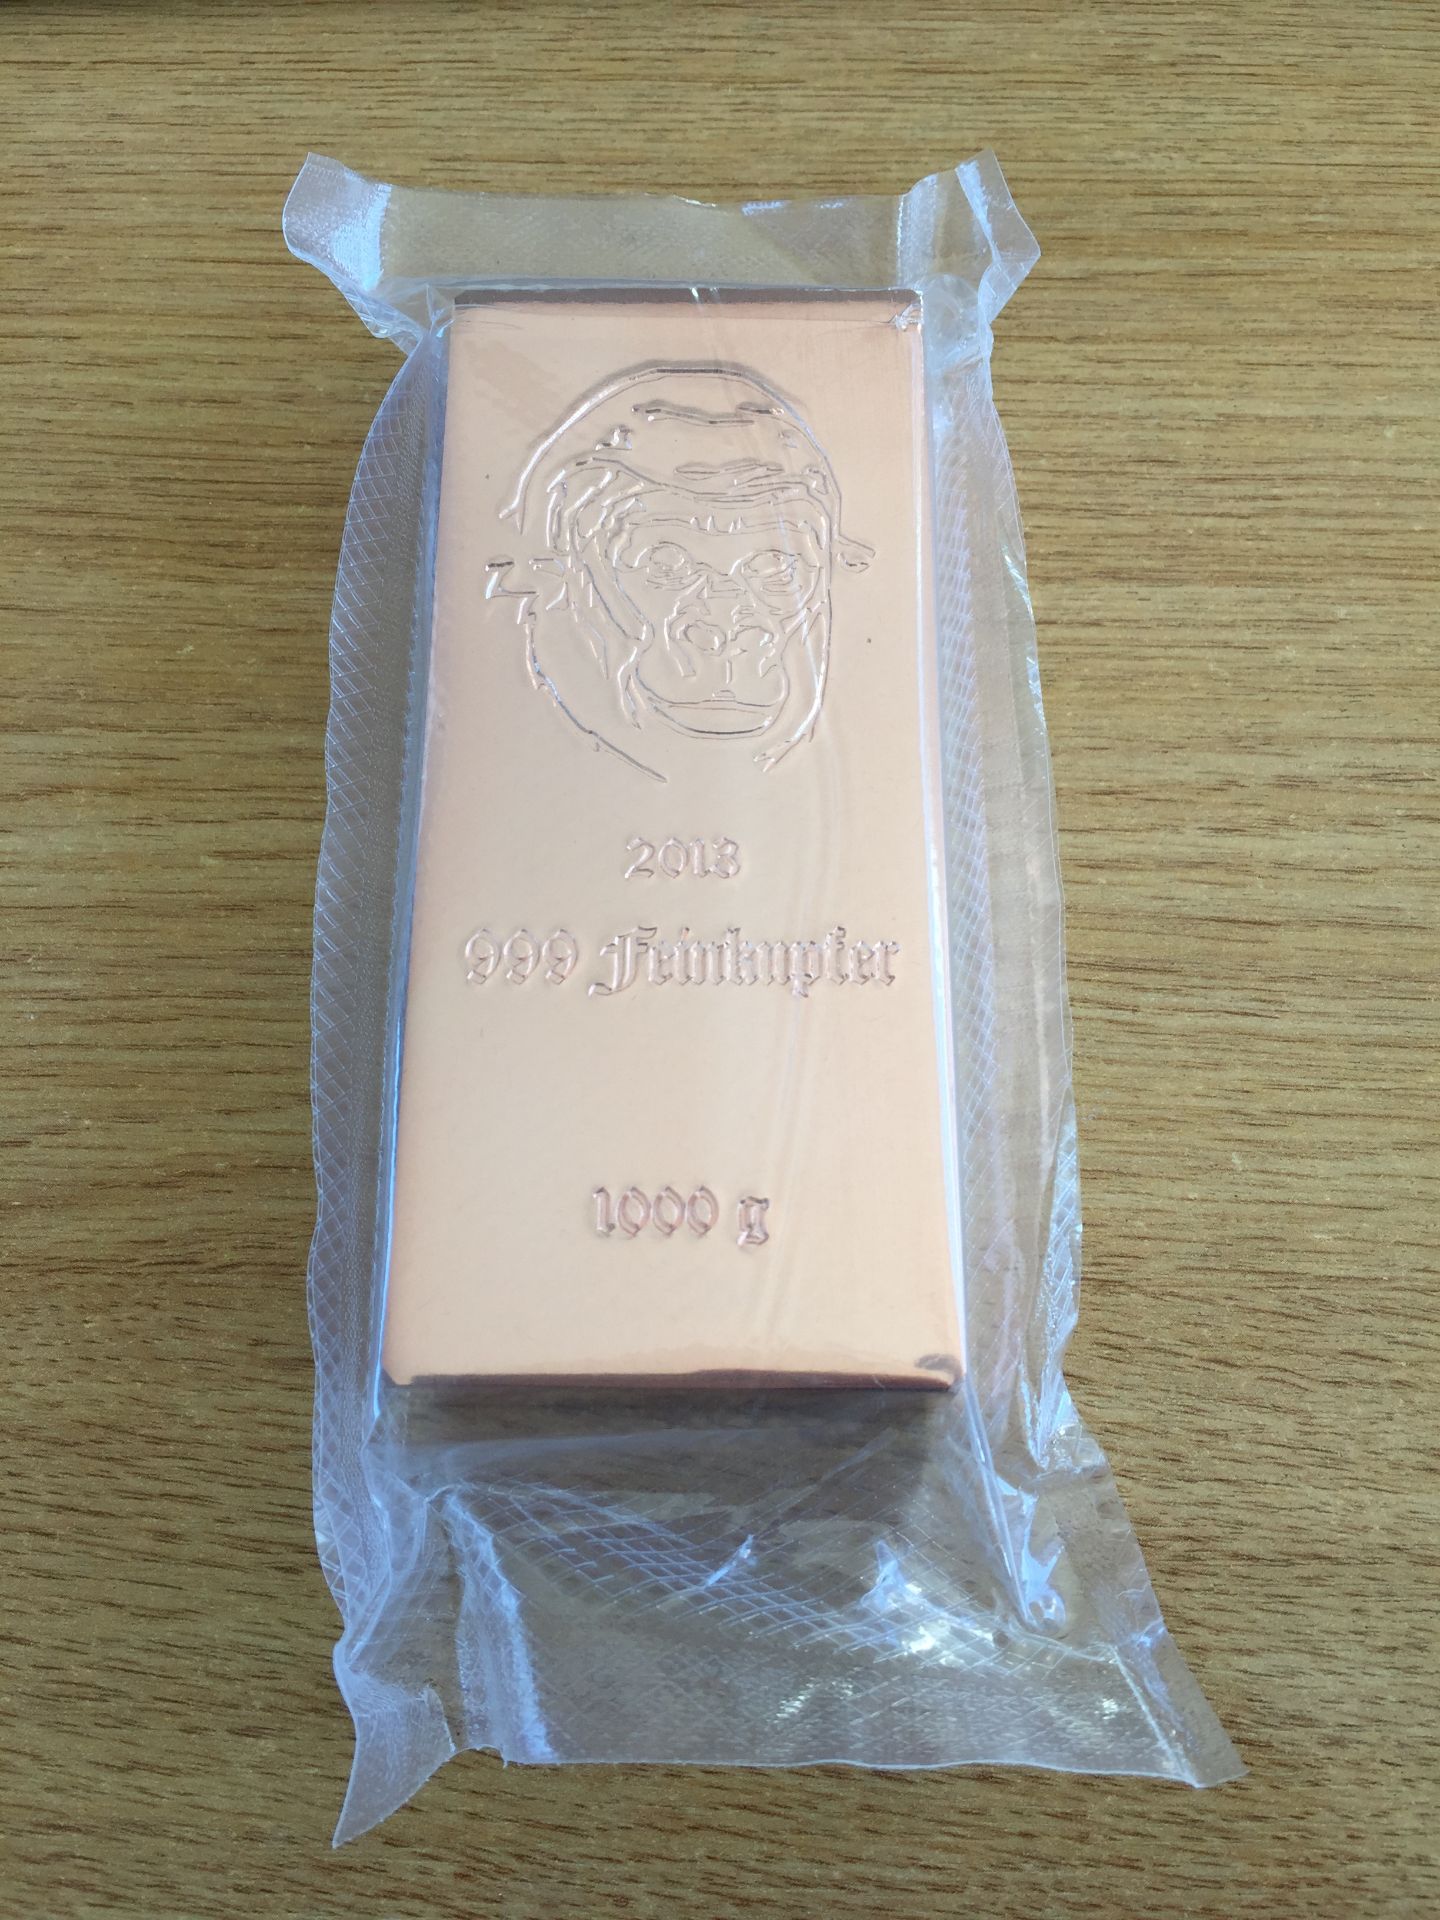 PURE COPPER BULLION 1 KG .999 = 99.9% PURITY. INVESTMENT WITH GORILLA FACE!